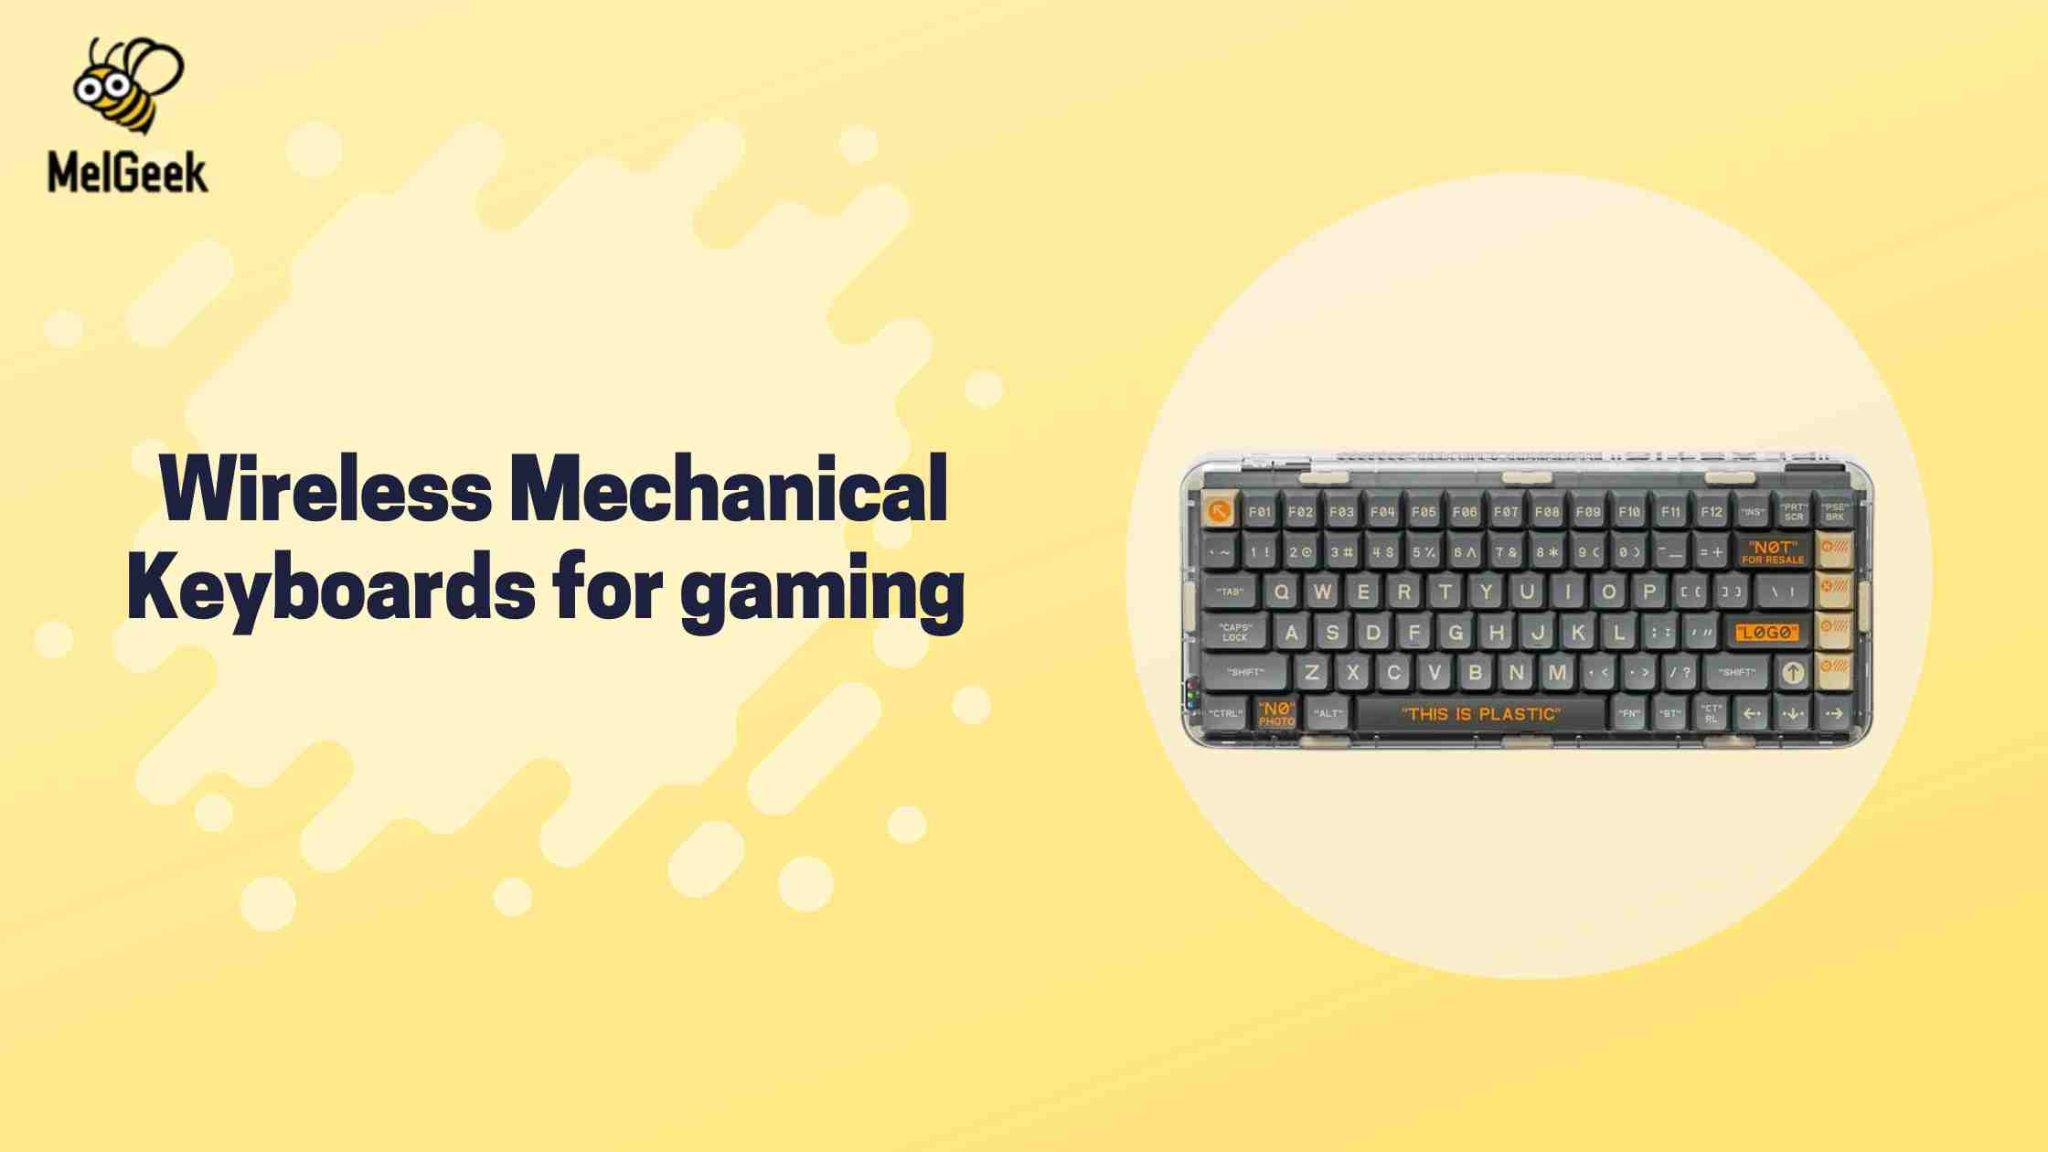 Wireless Mechanical Keyboards for Gaming: Ultimate Freedom and Performance